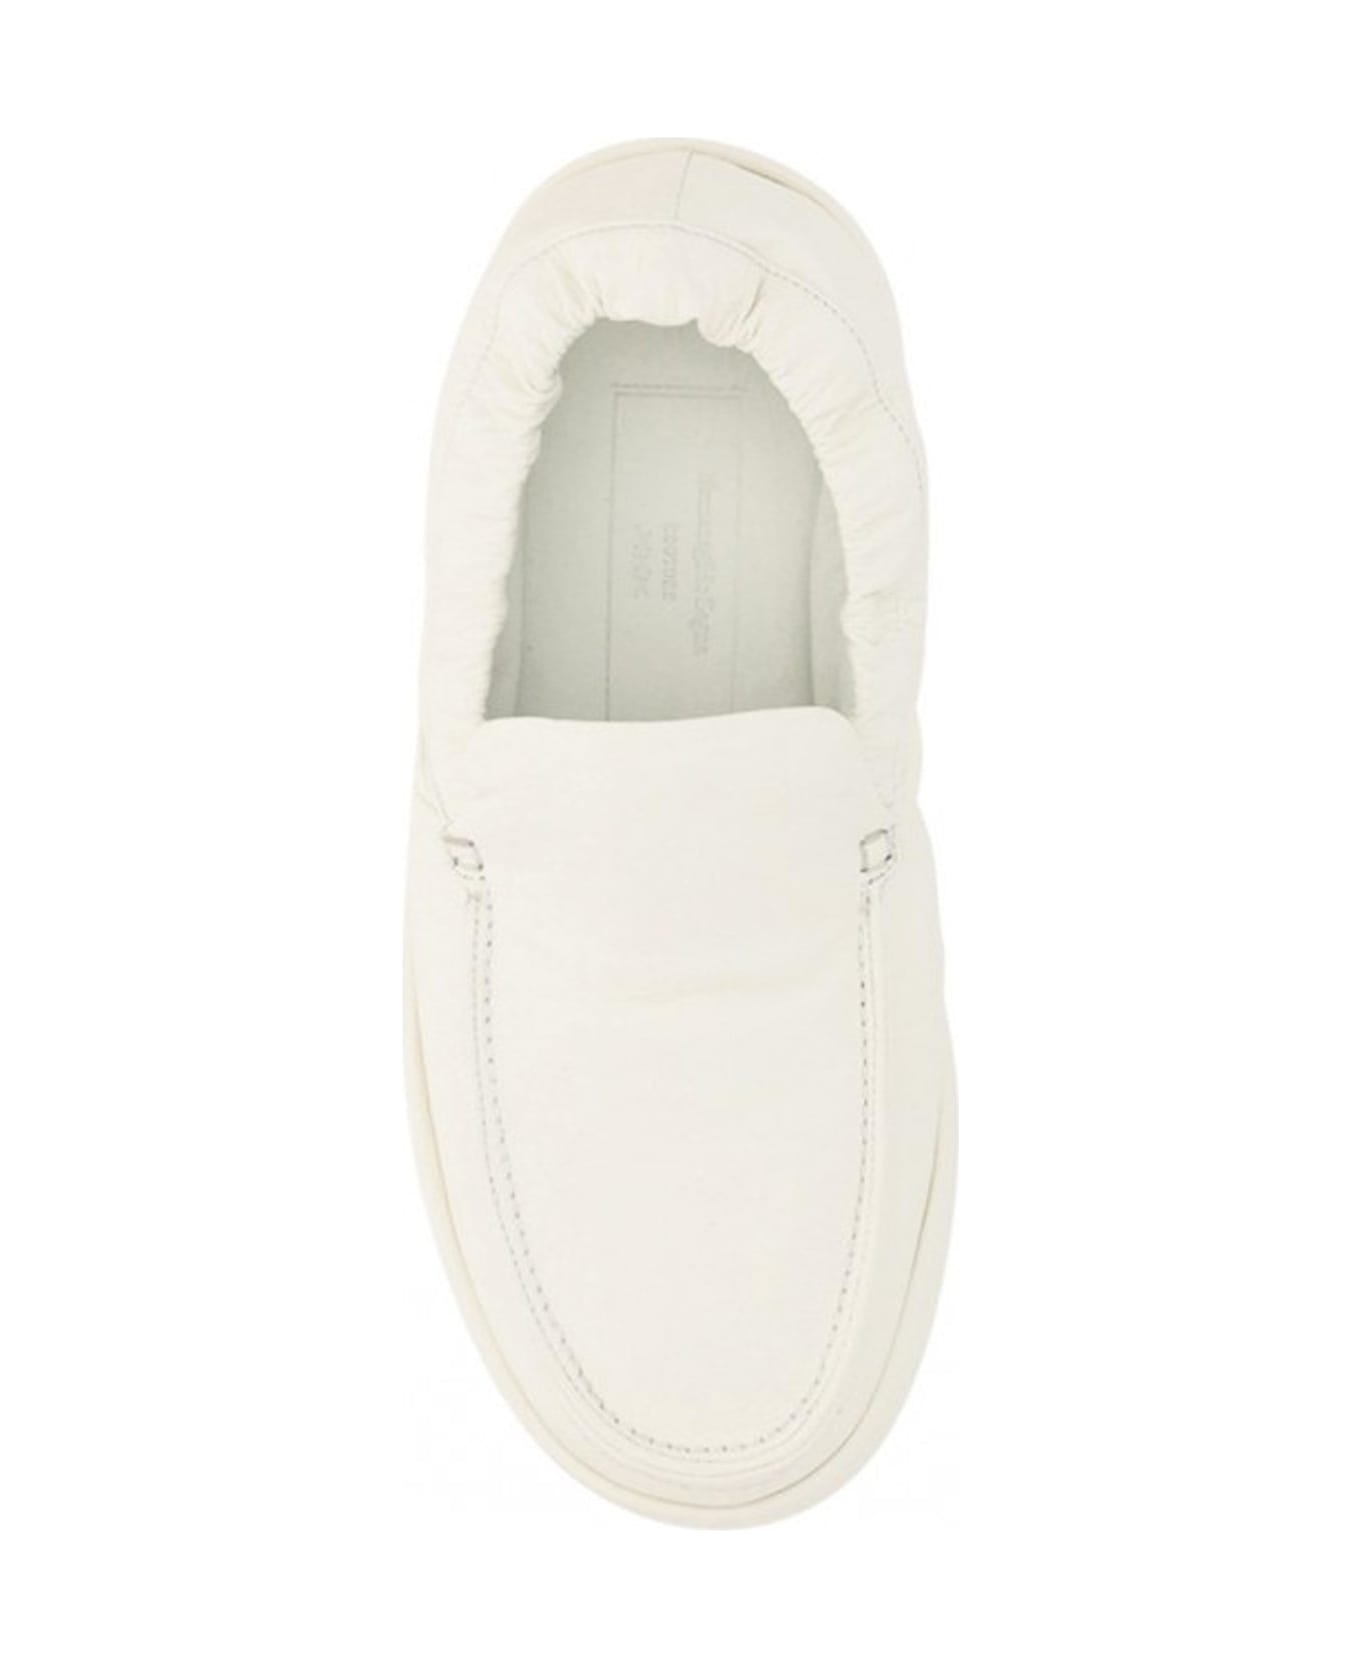 Zegna Leather Loafers - White